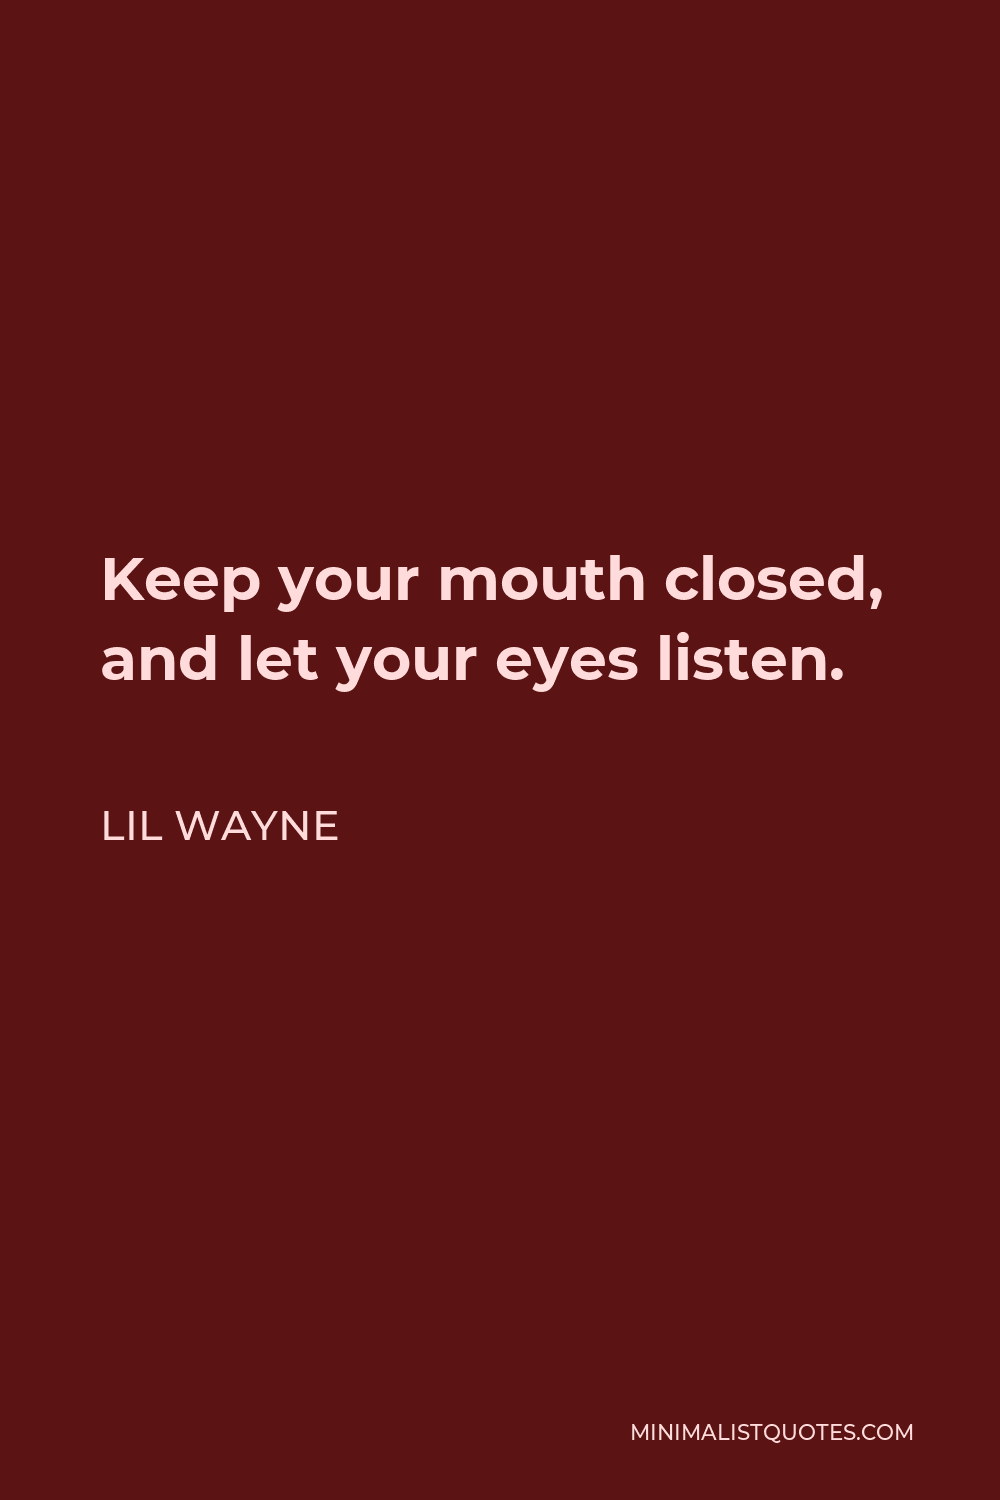 Lil Wayne Quote - Keep your mouth closed, and let your eyes listen.